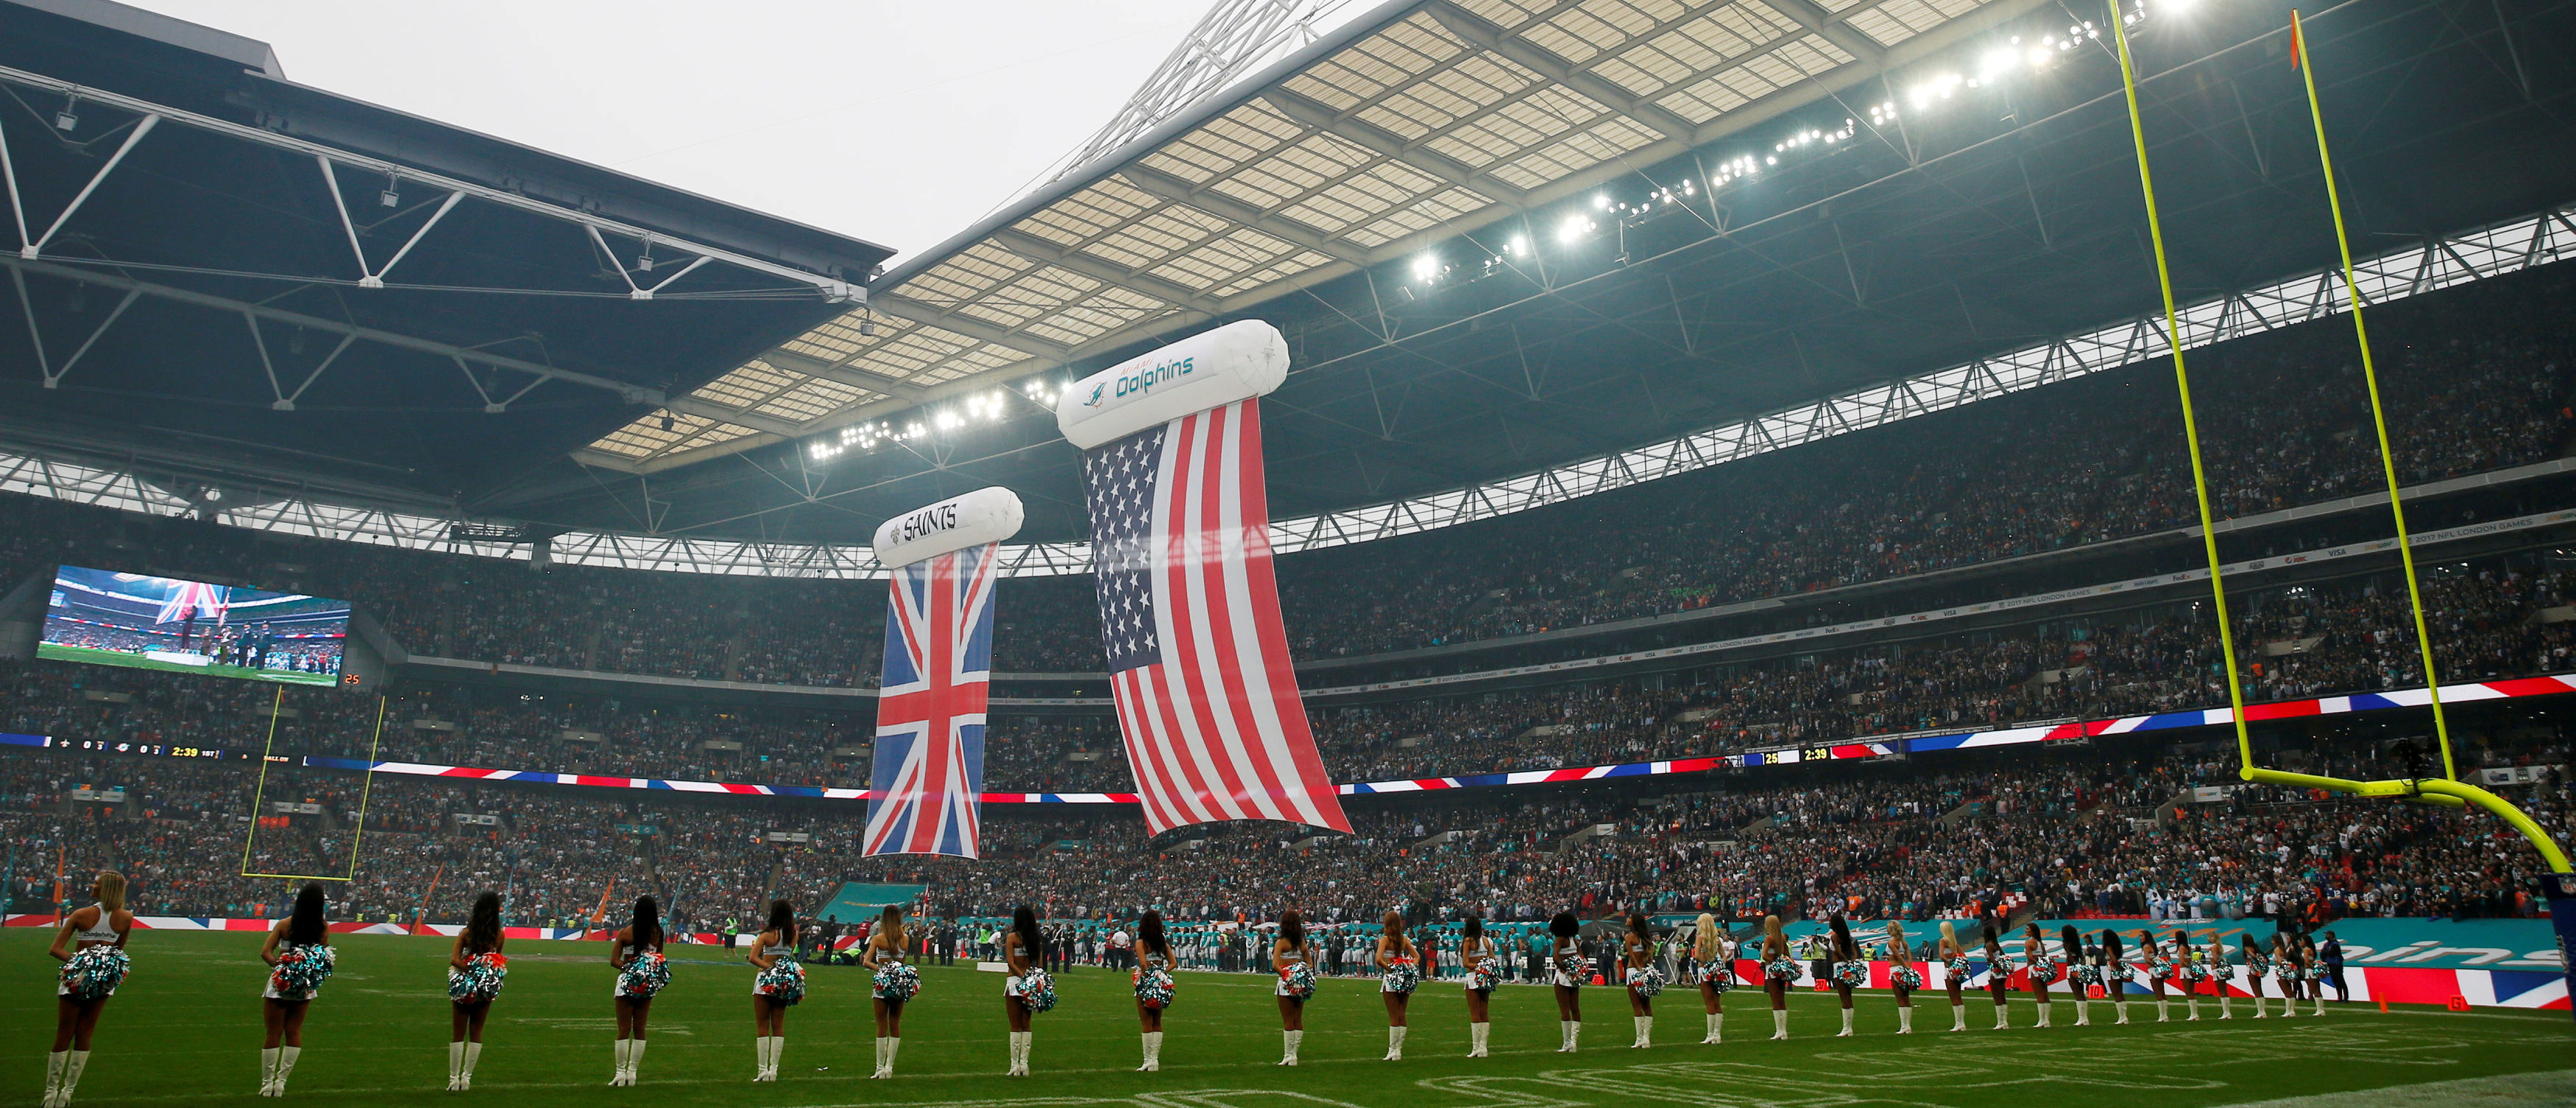 FILE PHOTO: General view before the game between the Miami Dolphins and the New Orleans Saints at Wembley Stadium in London, on October 1, 2017. (Photo: Action Images via Reuters/Paul Childs)